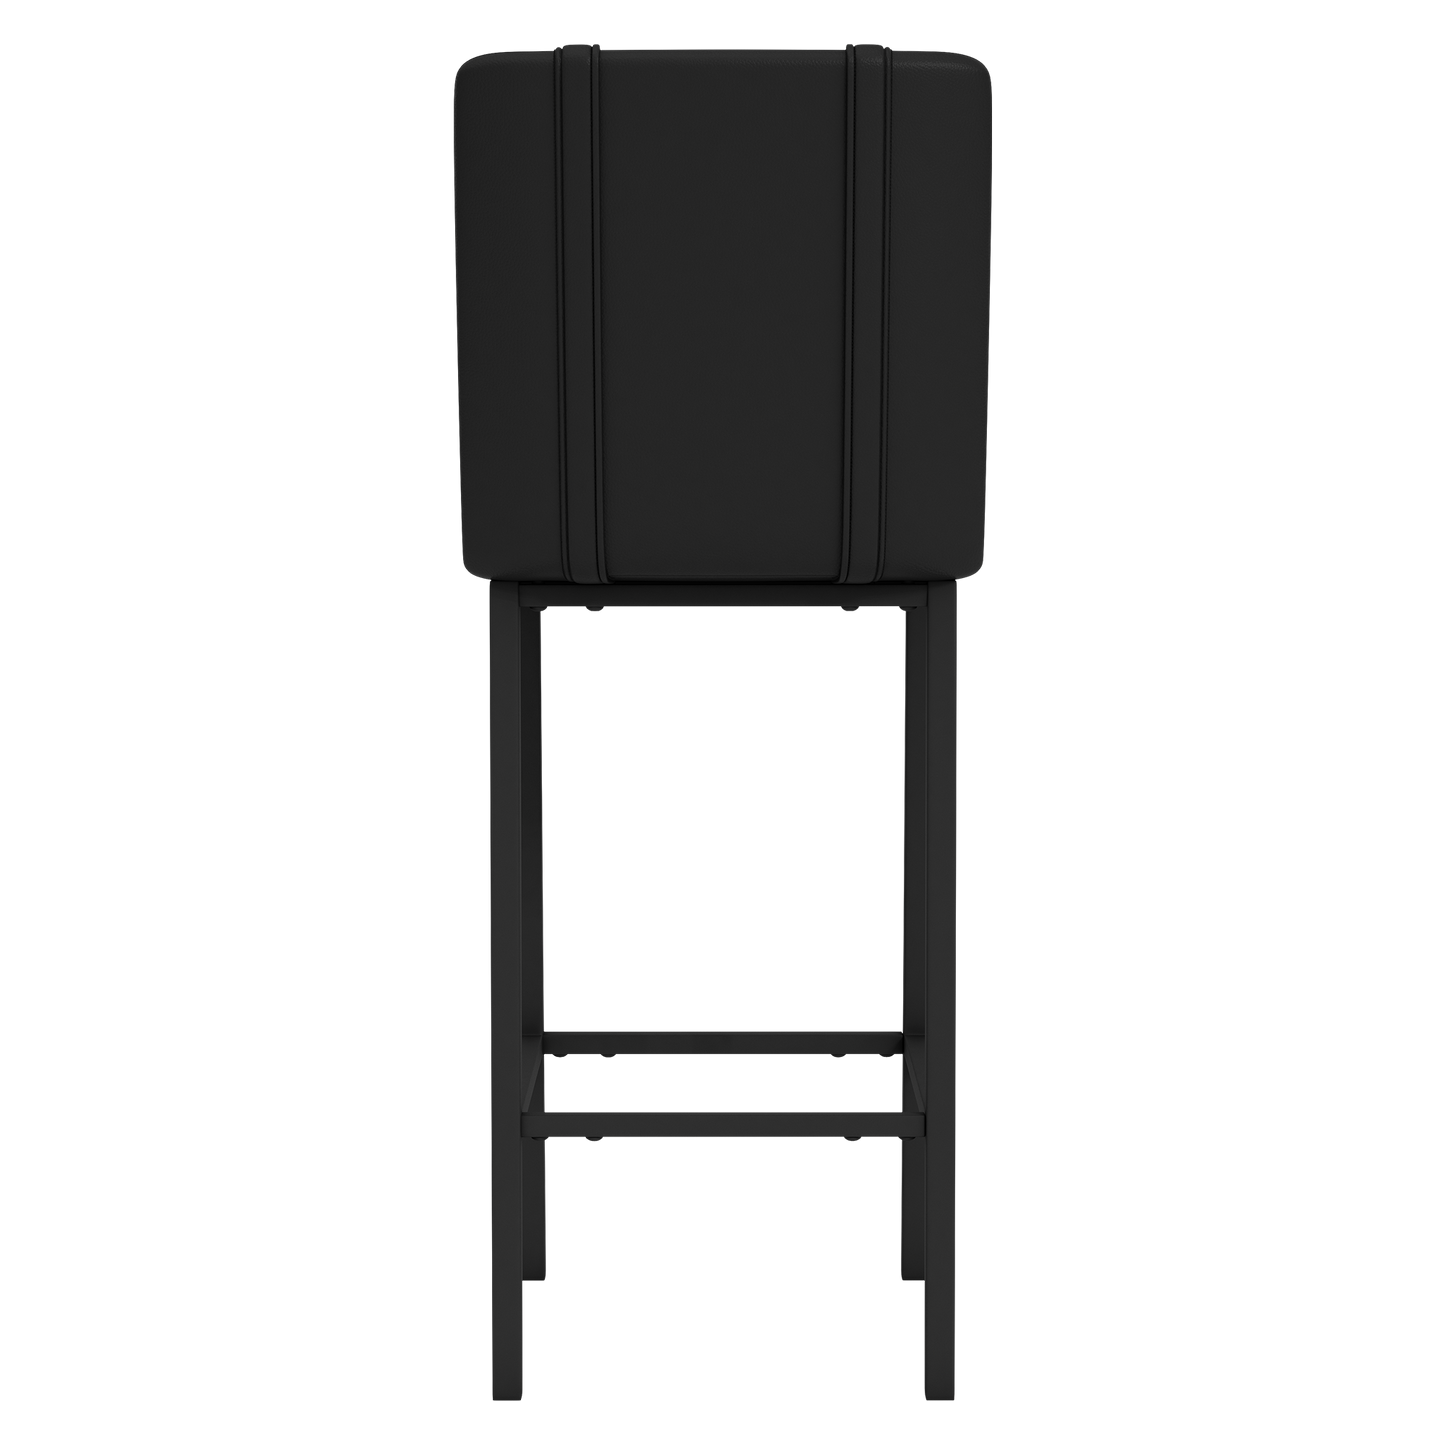 Bar Stool 500 with St Louis Cardinals Cooperstown Primary Set of 2